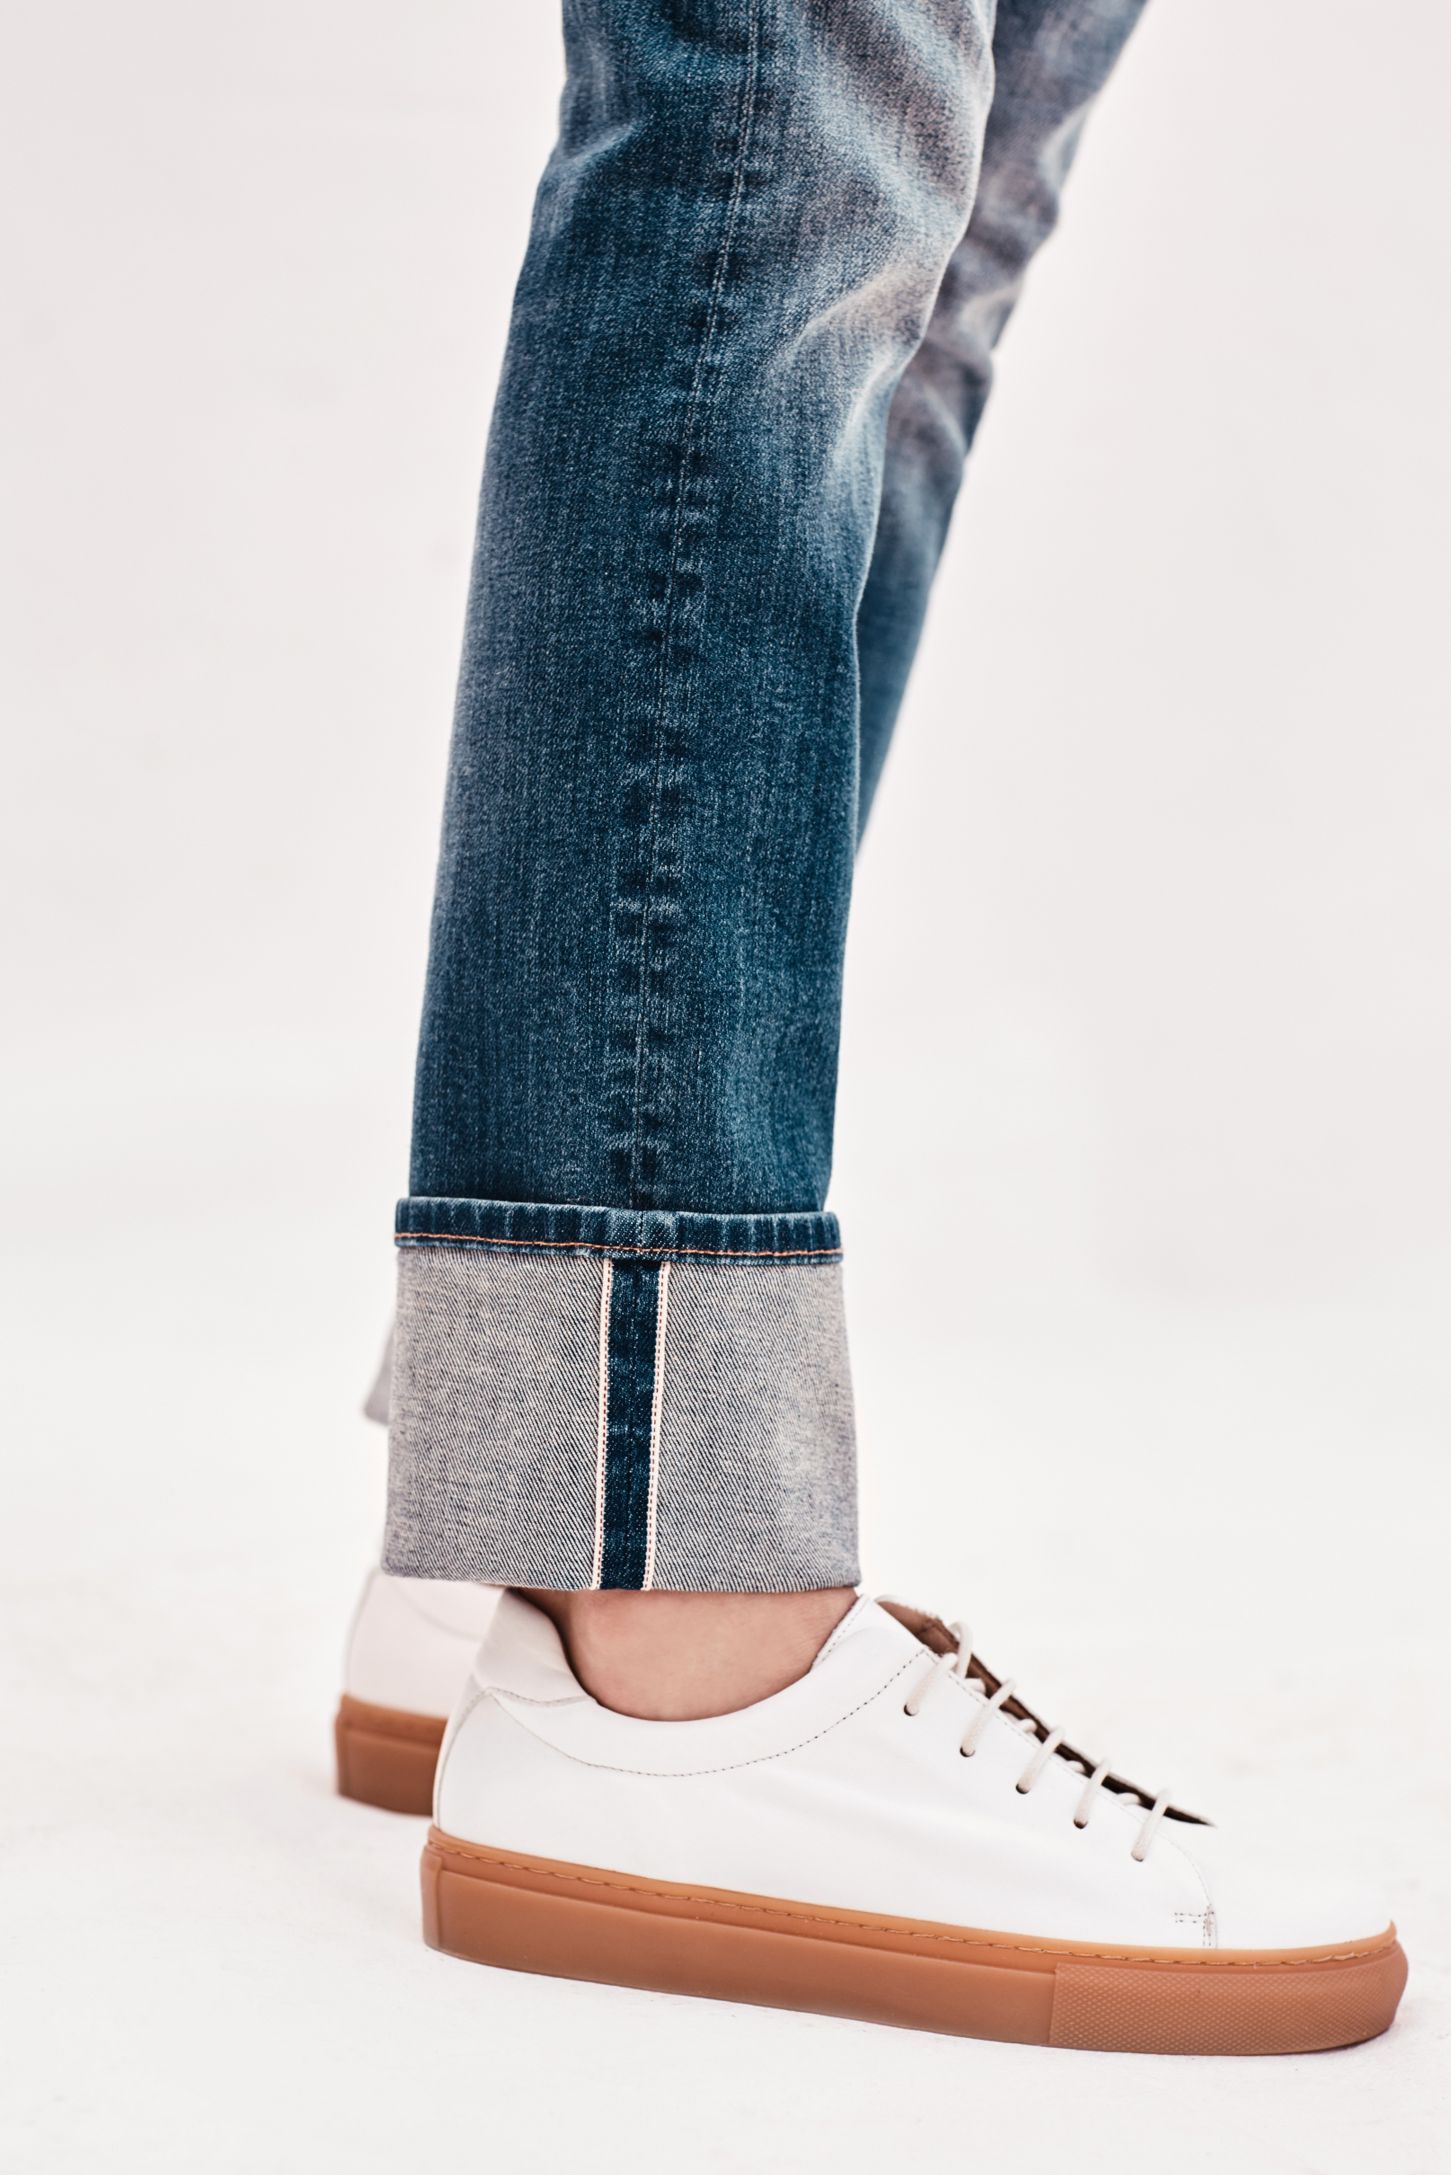 Pilcro Parallel Mid-Rise Jeans | Anthropologie